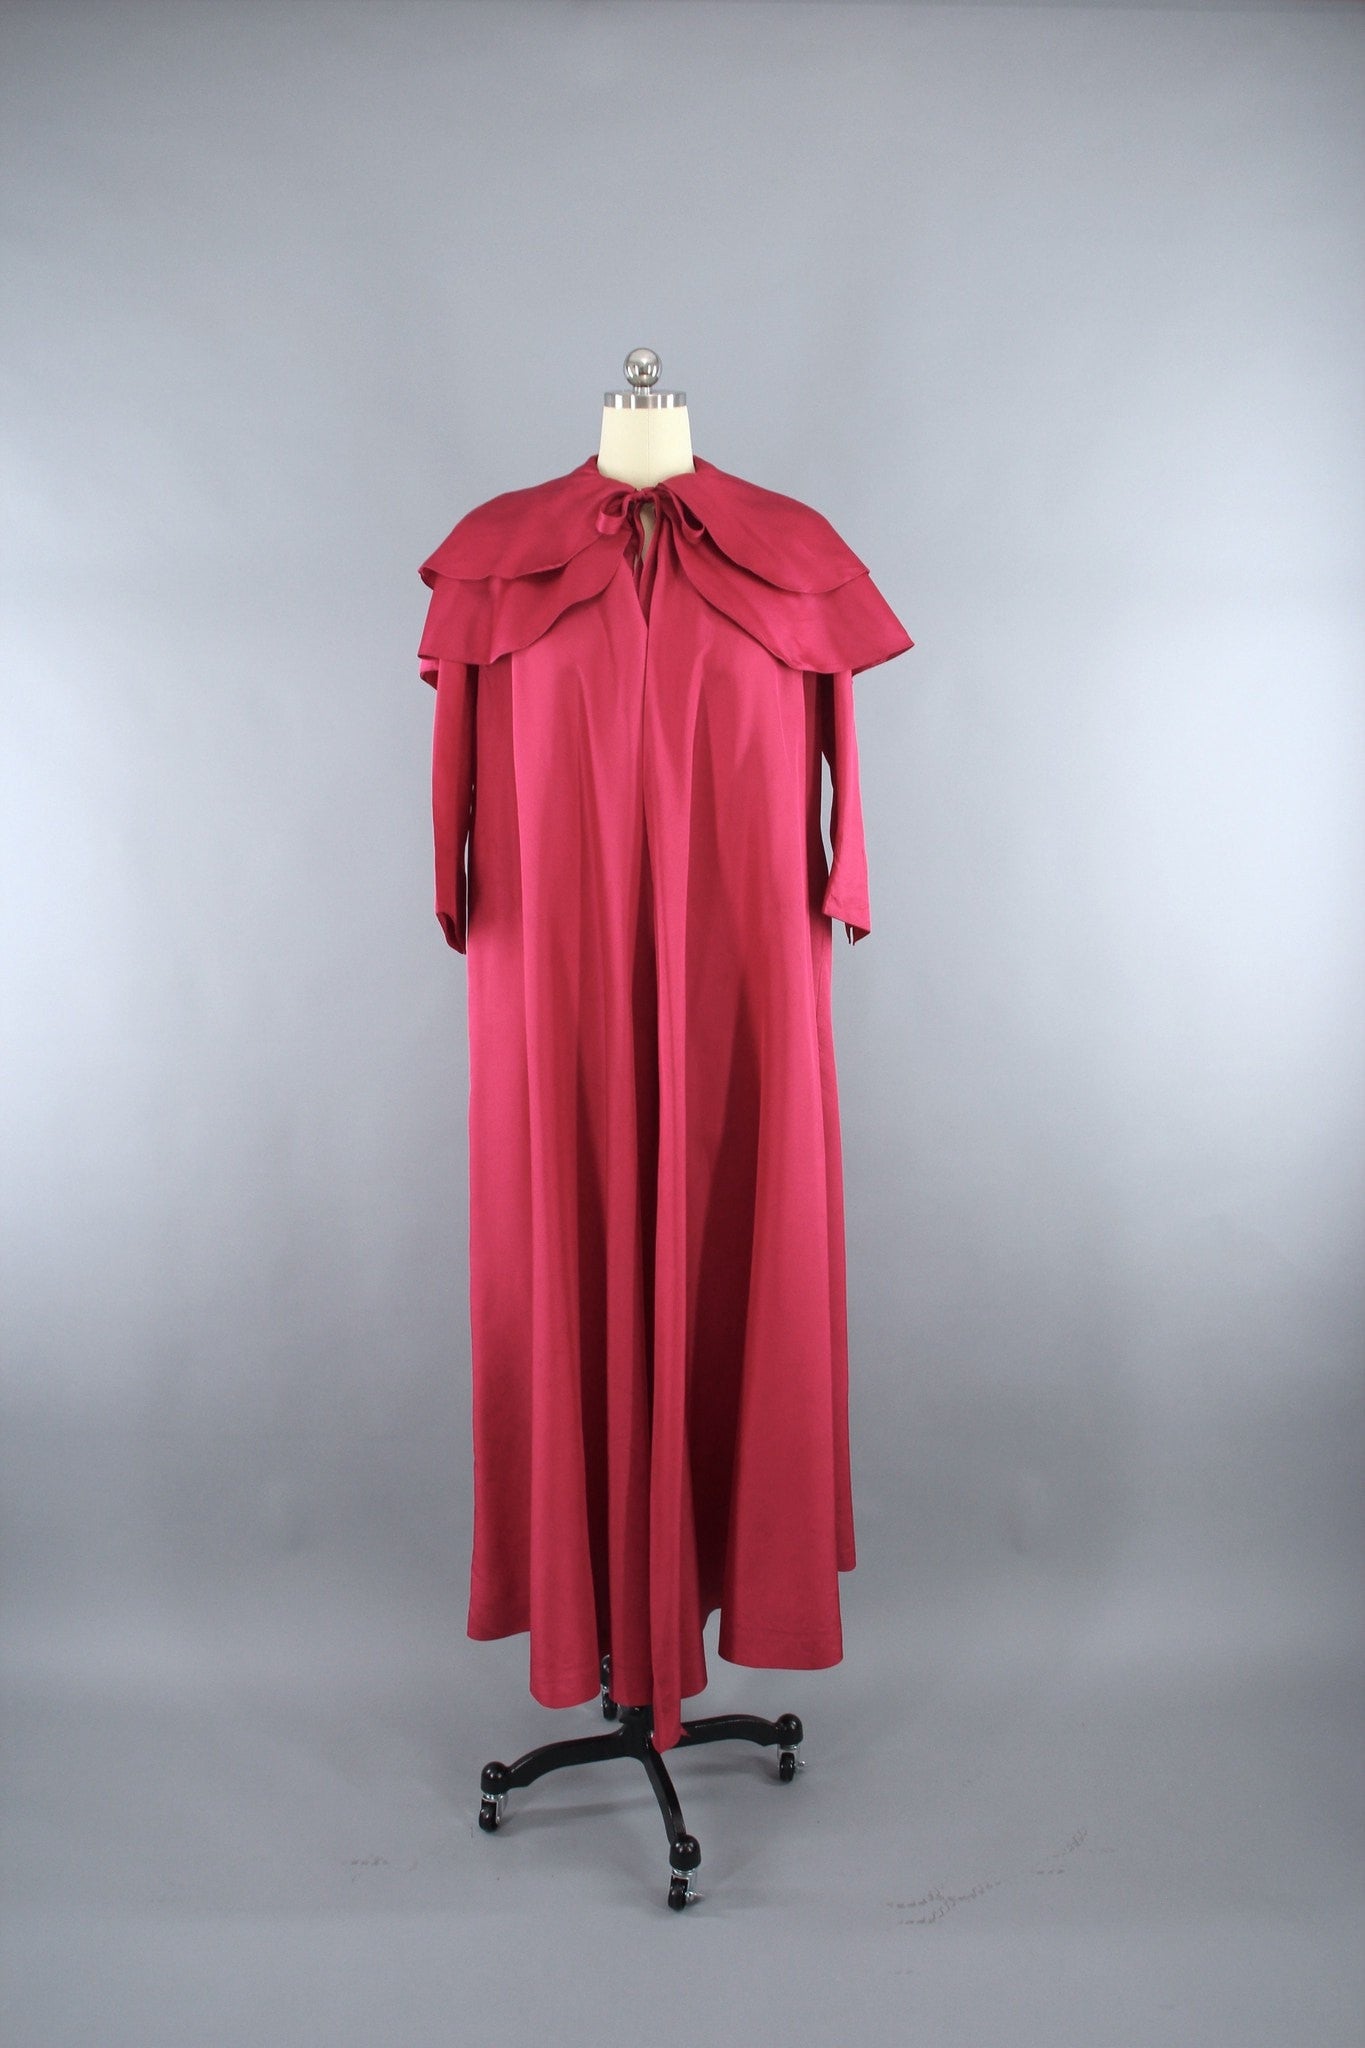 Vintage 1960s Robe in Bright Pink Satin by Lucie Ann Beverly Hills - ThisBlueBird